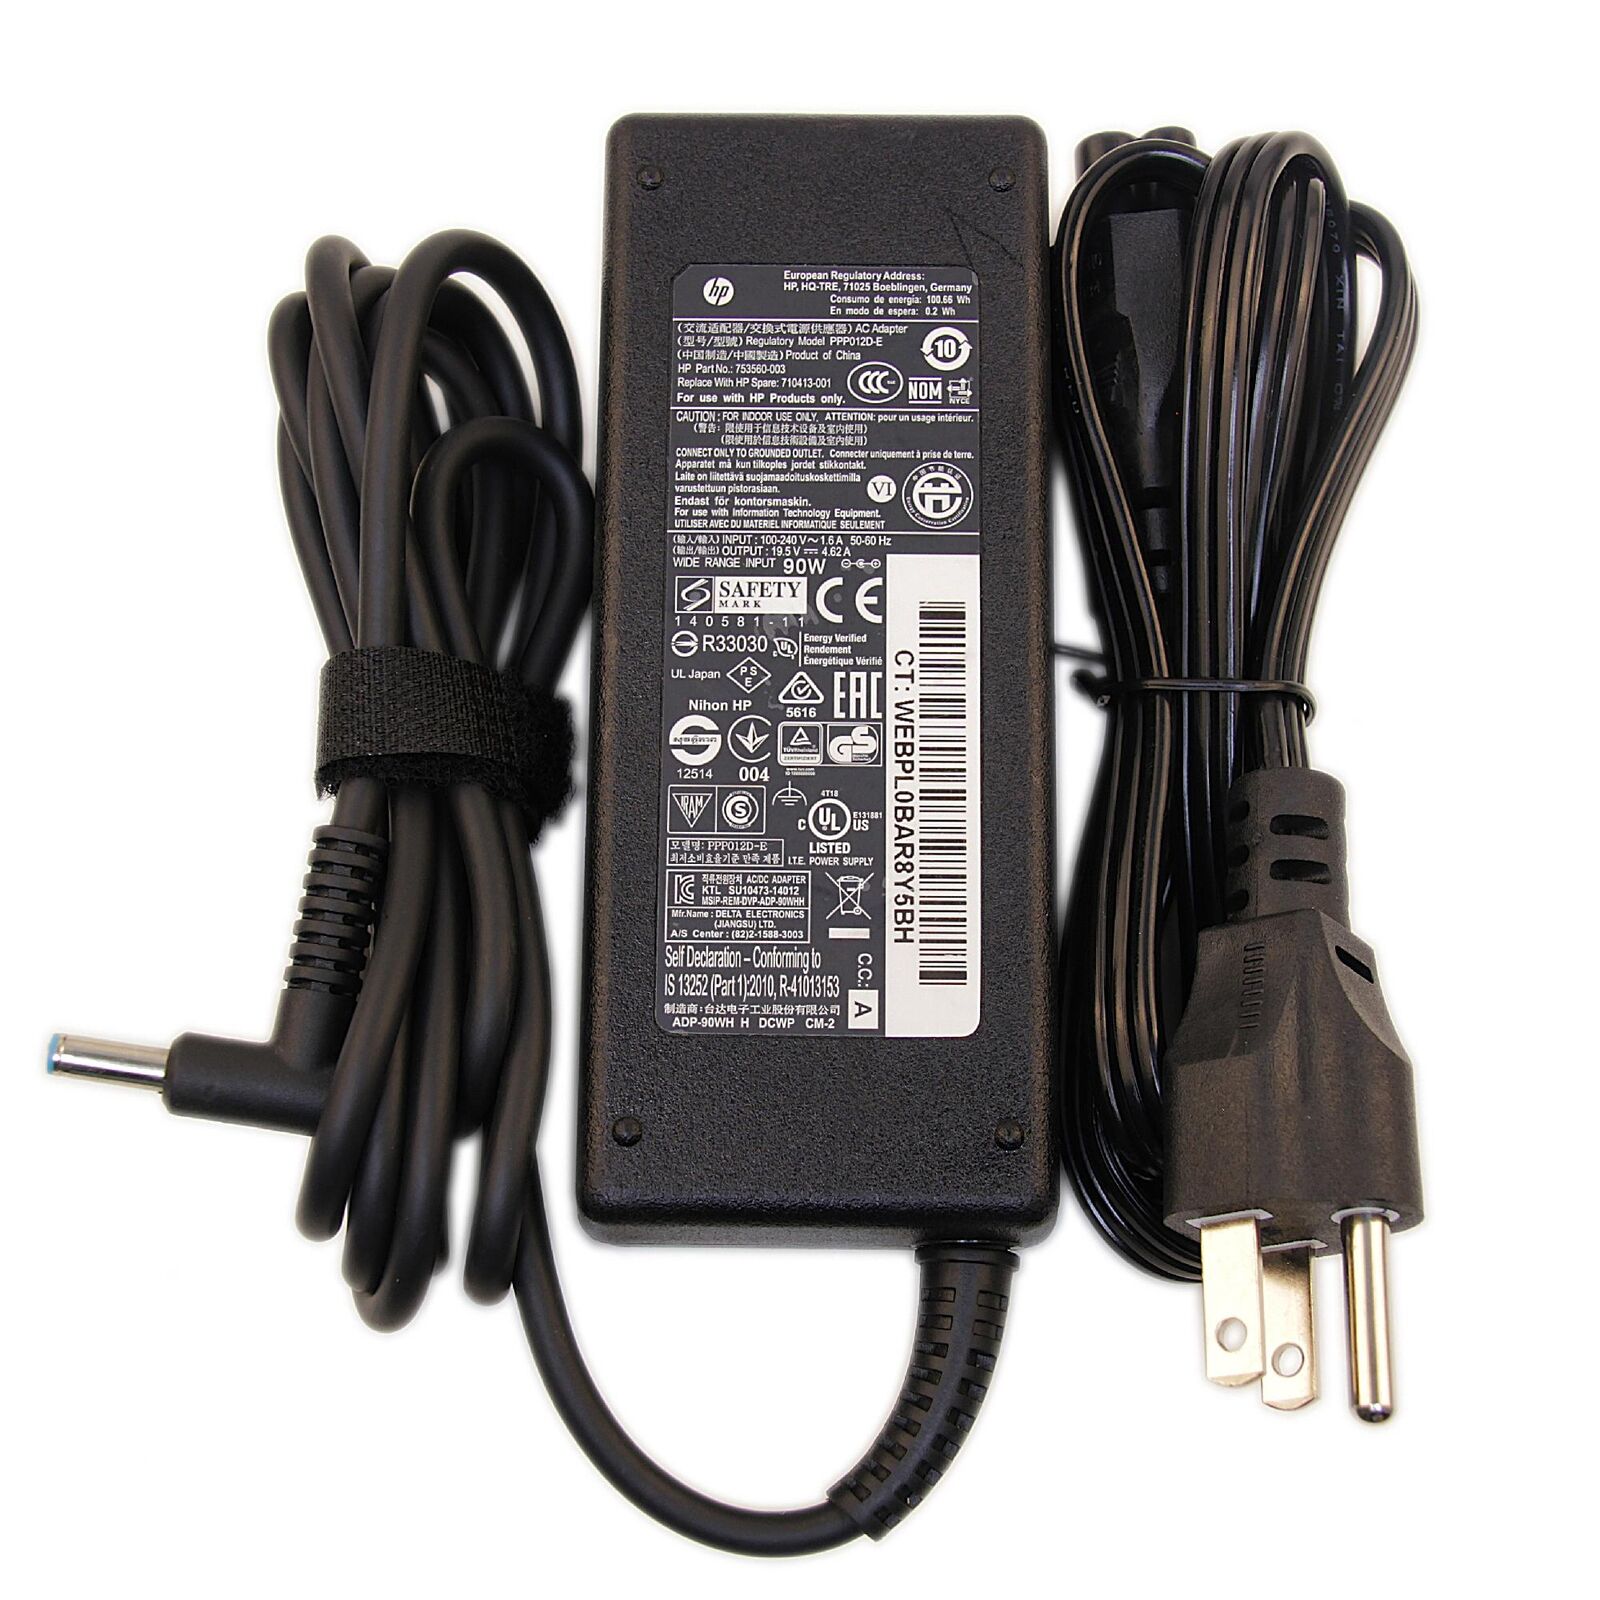 HP PPP012C-S 19.5V 4.62A 90W Genuine Original AC Power Adapter Charger